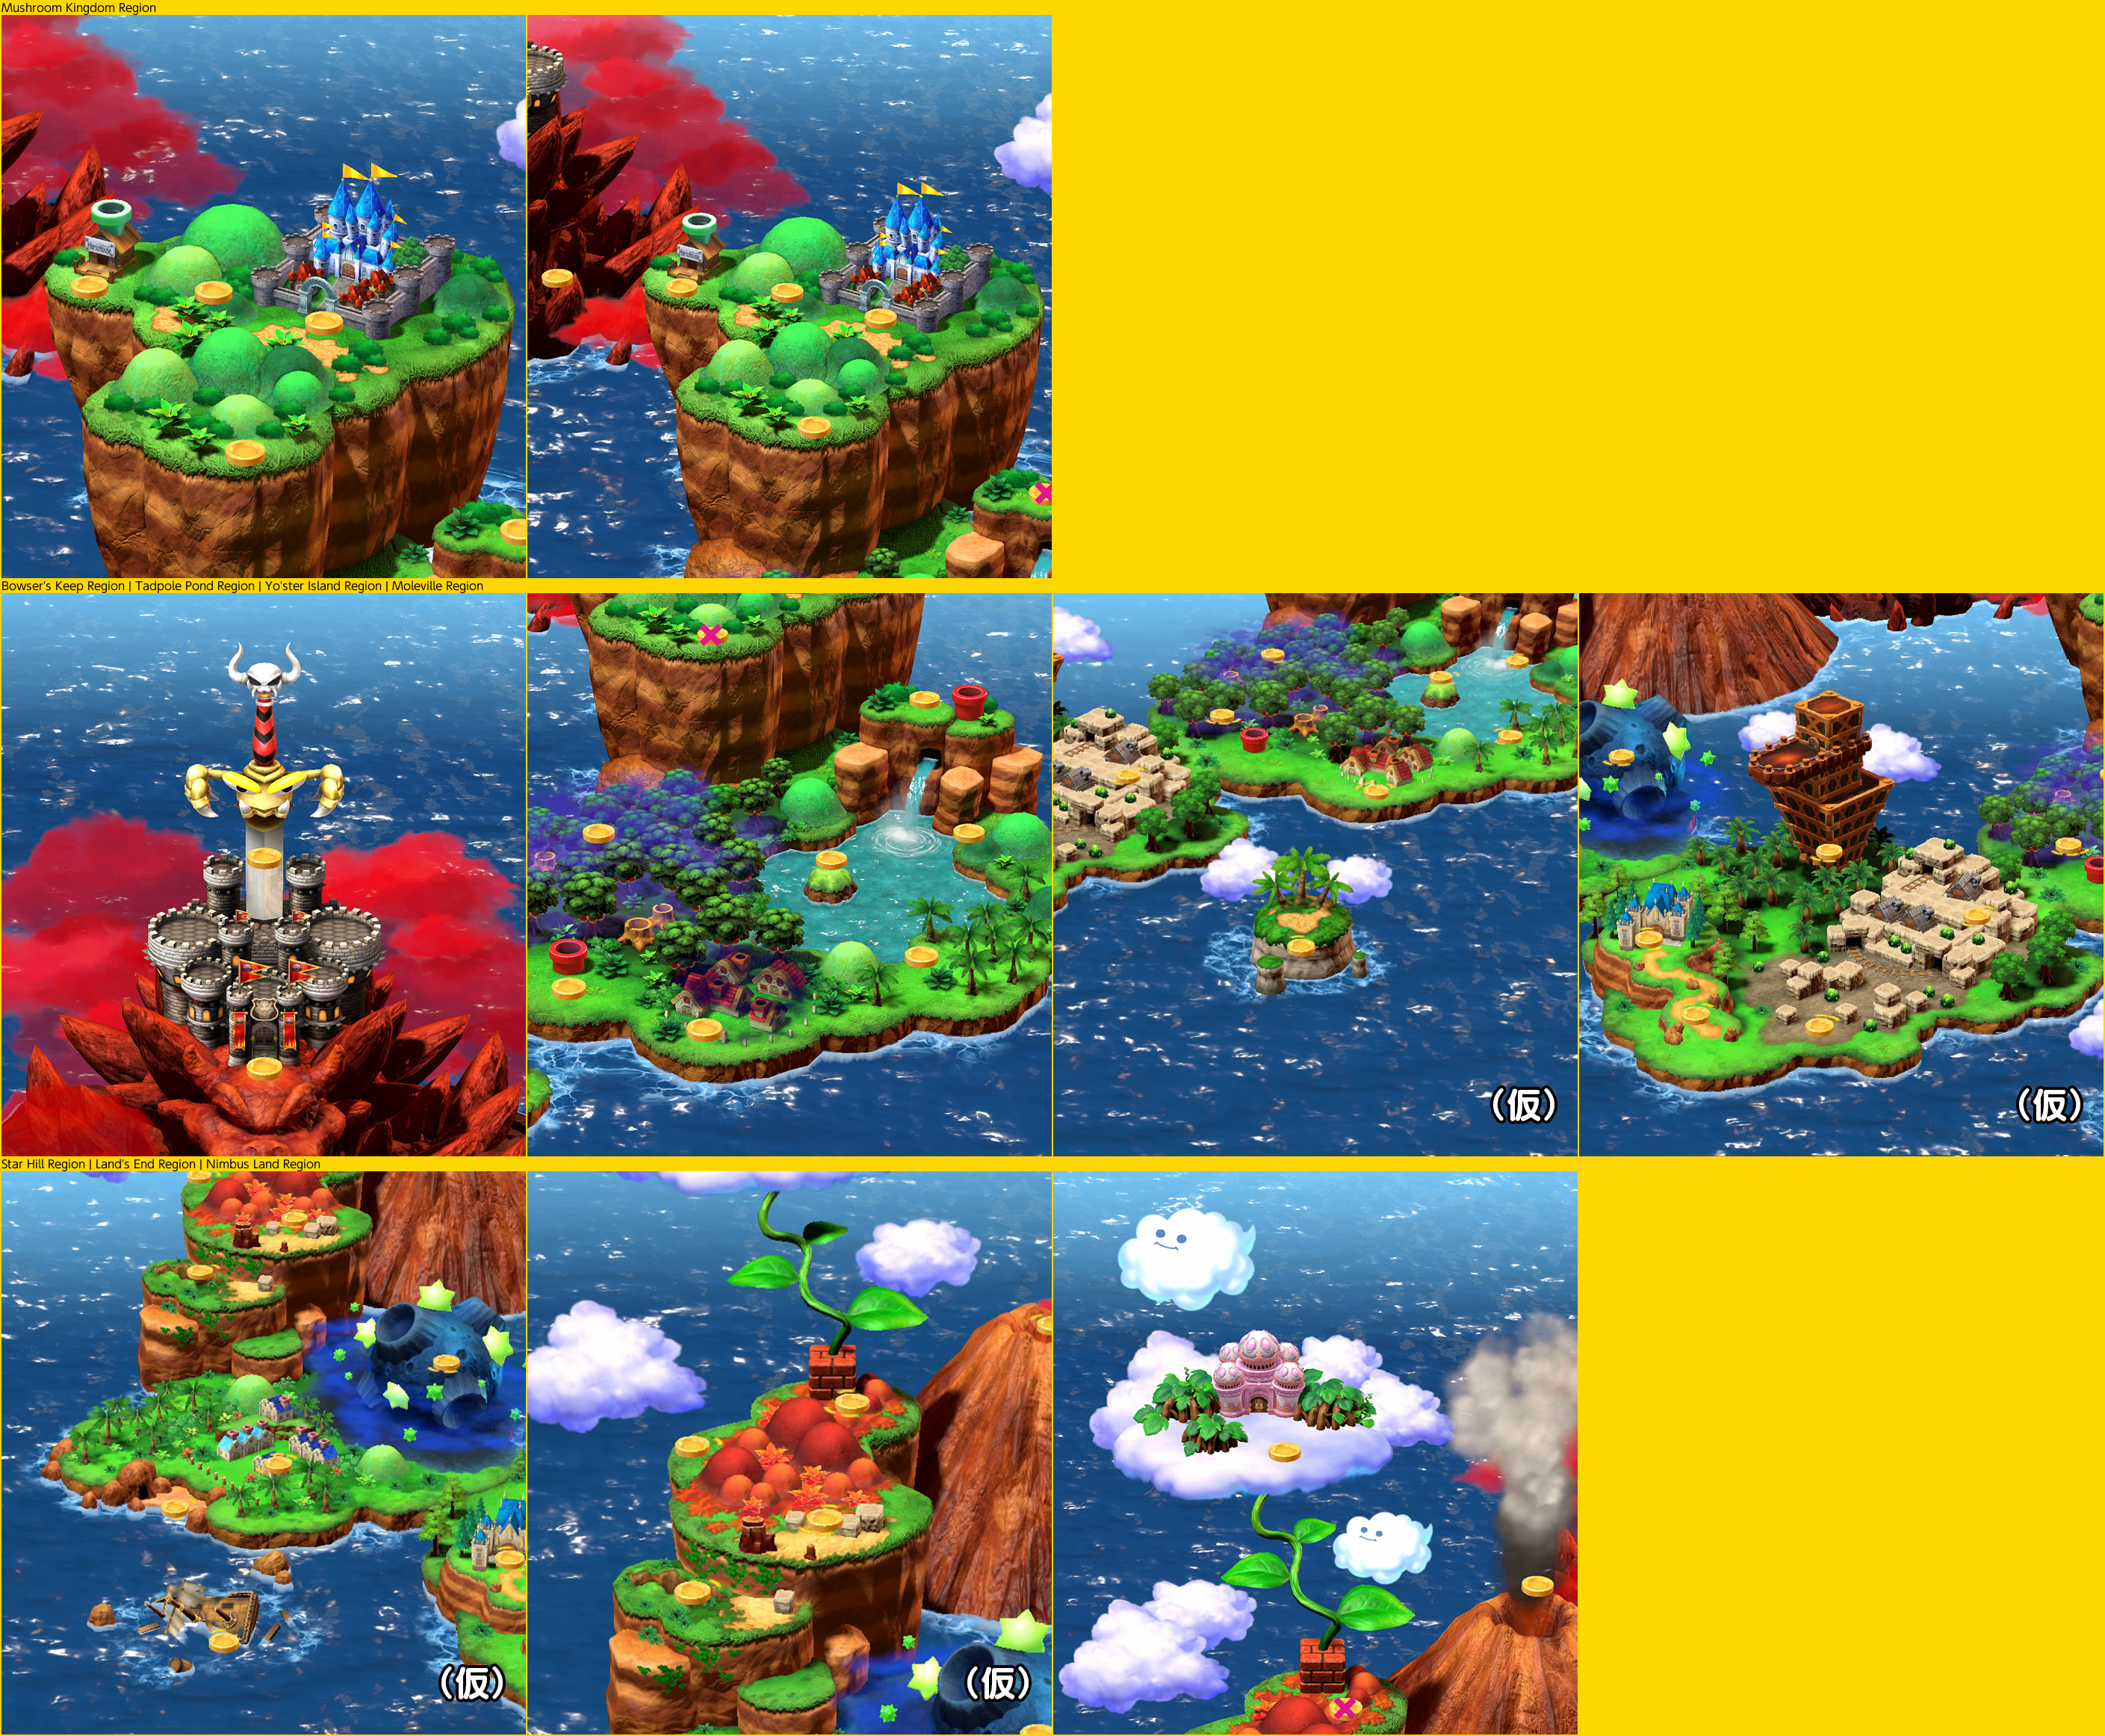 Super Mario RPG - Main Menu - Map Sections (With Markers)